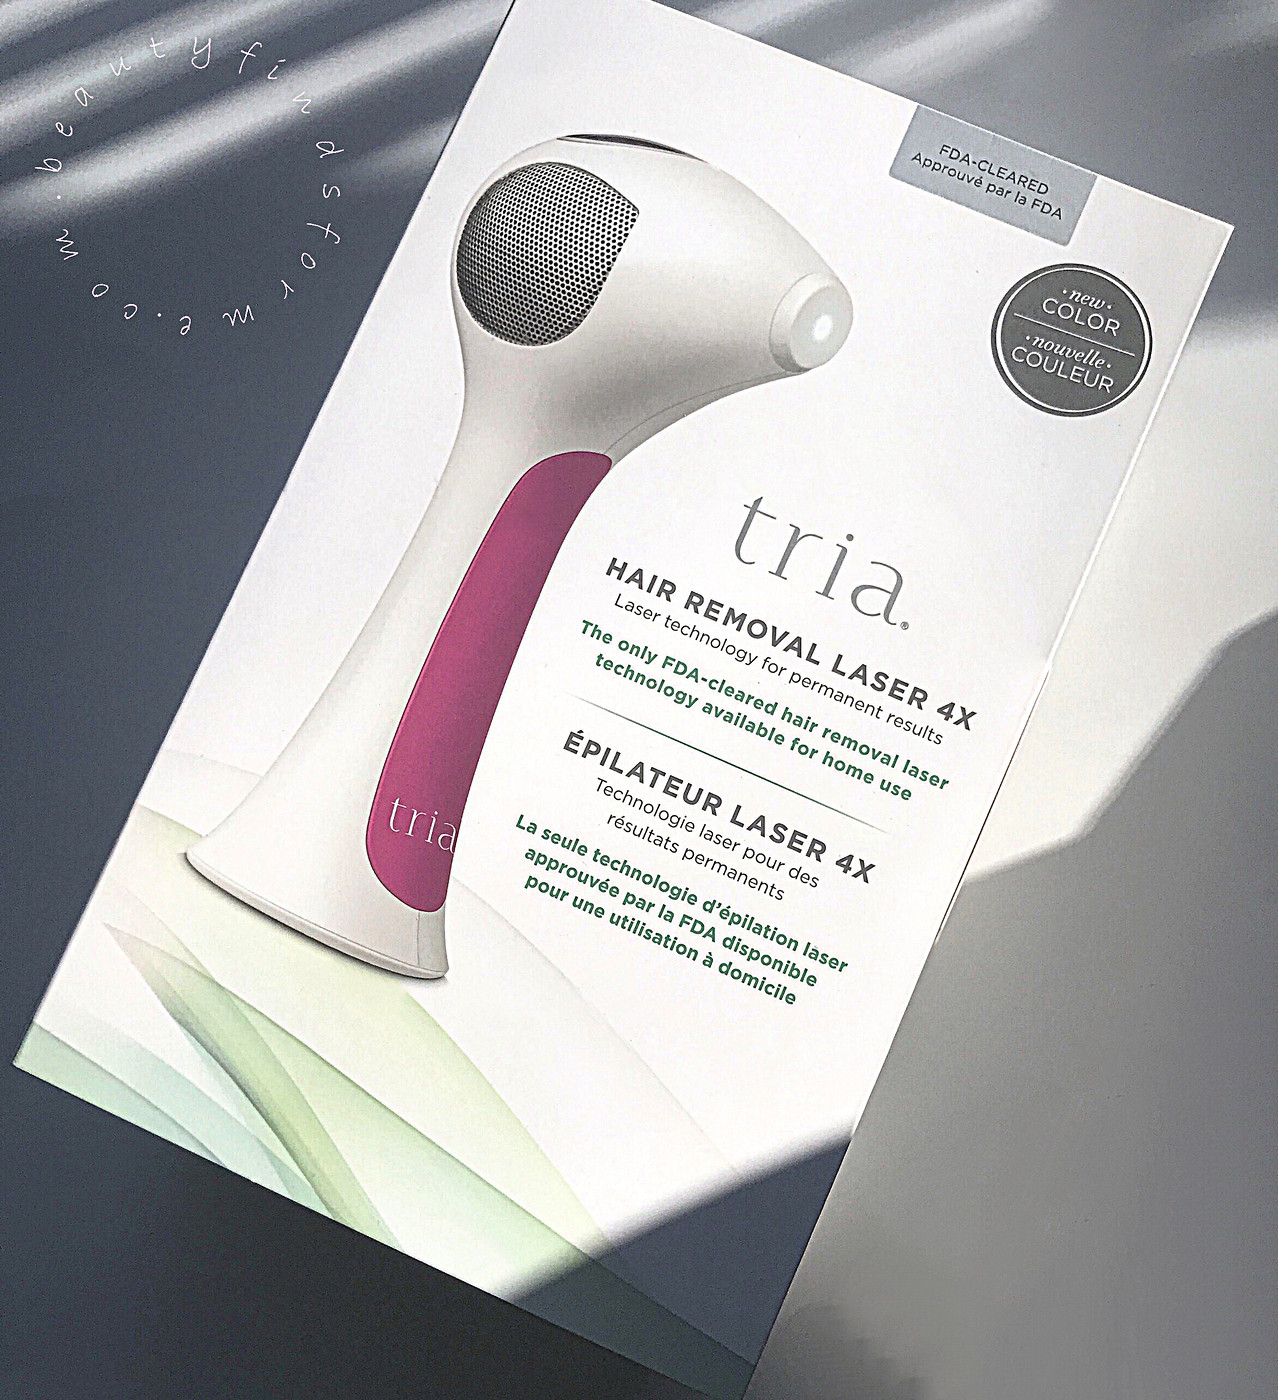 My Blog Journey with Tria Hair Removal Laser 4X Device – Unboxing Beauty